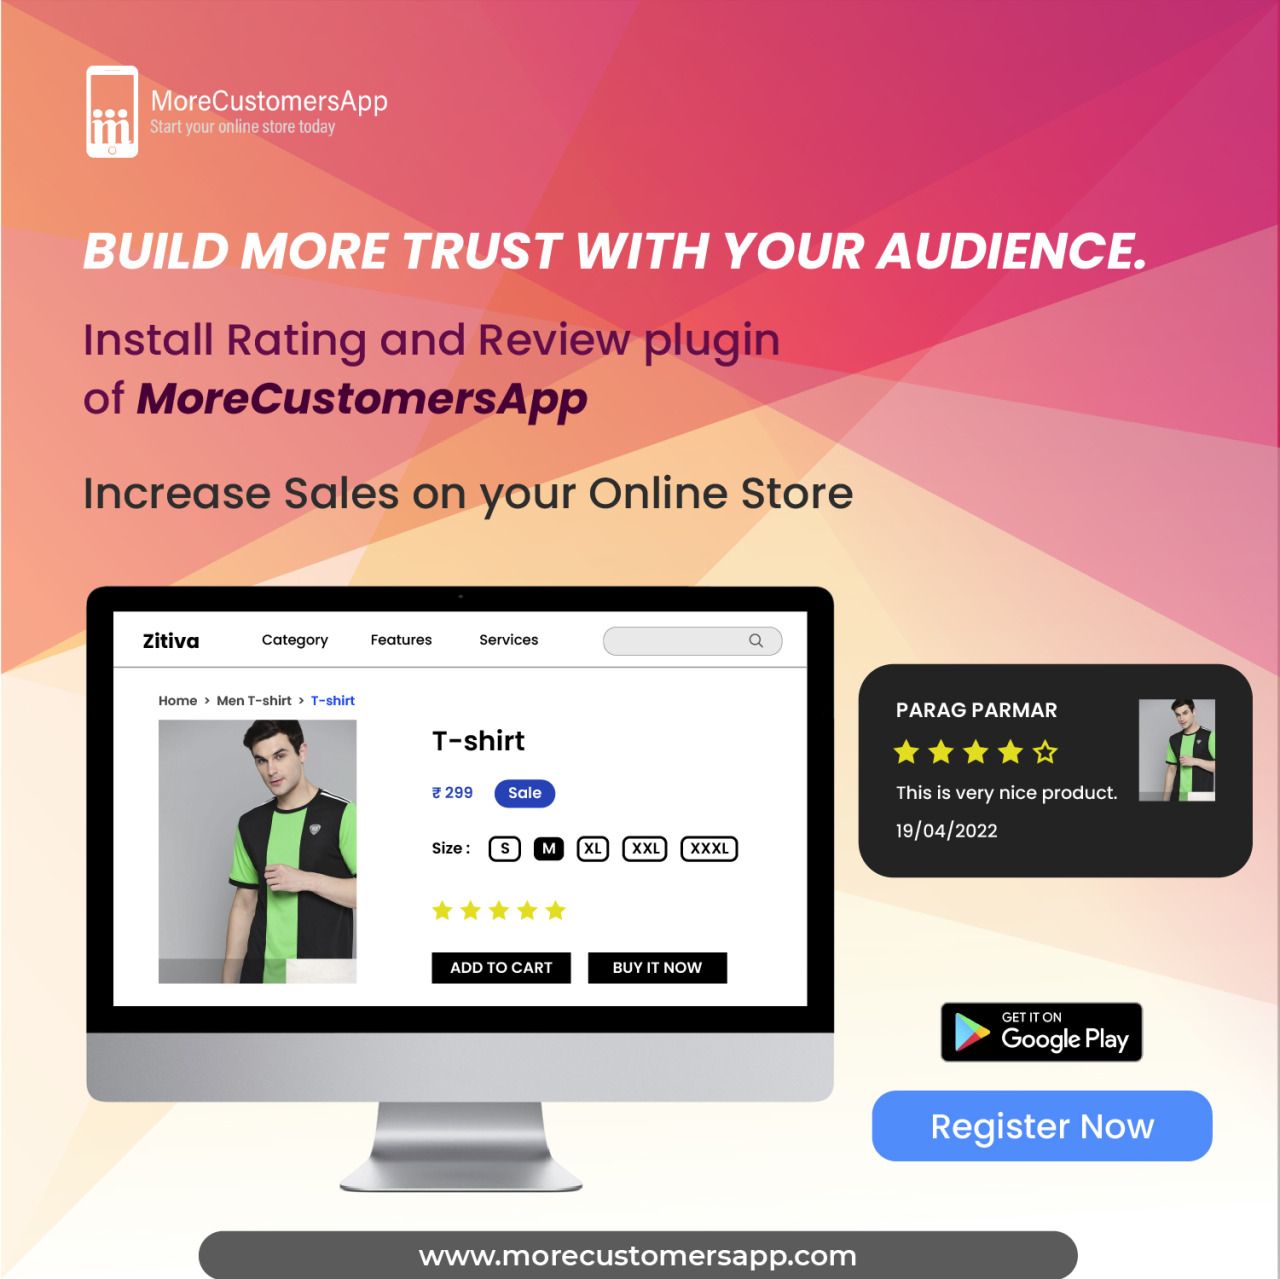 BUILD MORE TRUST WITH YOUR AUDIENCE.
MoreCustomersApp review plugins are really important for your online store.
Increase Sales on your Online Store .Register Now #morecustomersapp#Ecommerce#sell online#online business#online store#Onlineshopping#shopping website#shopping online#online sales